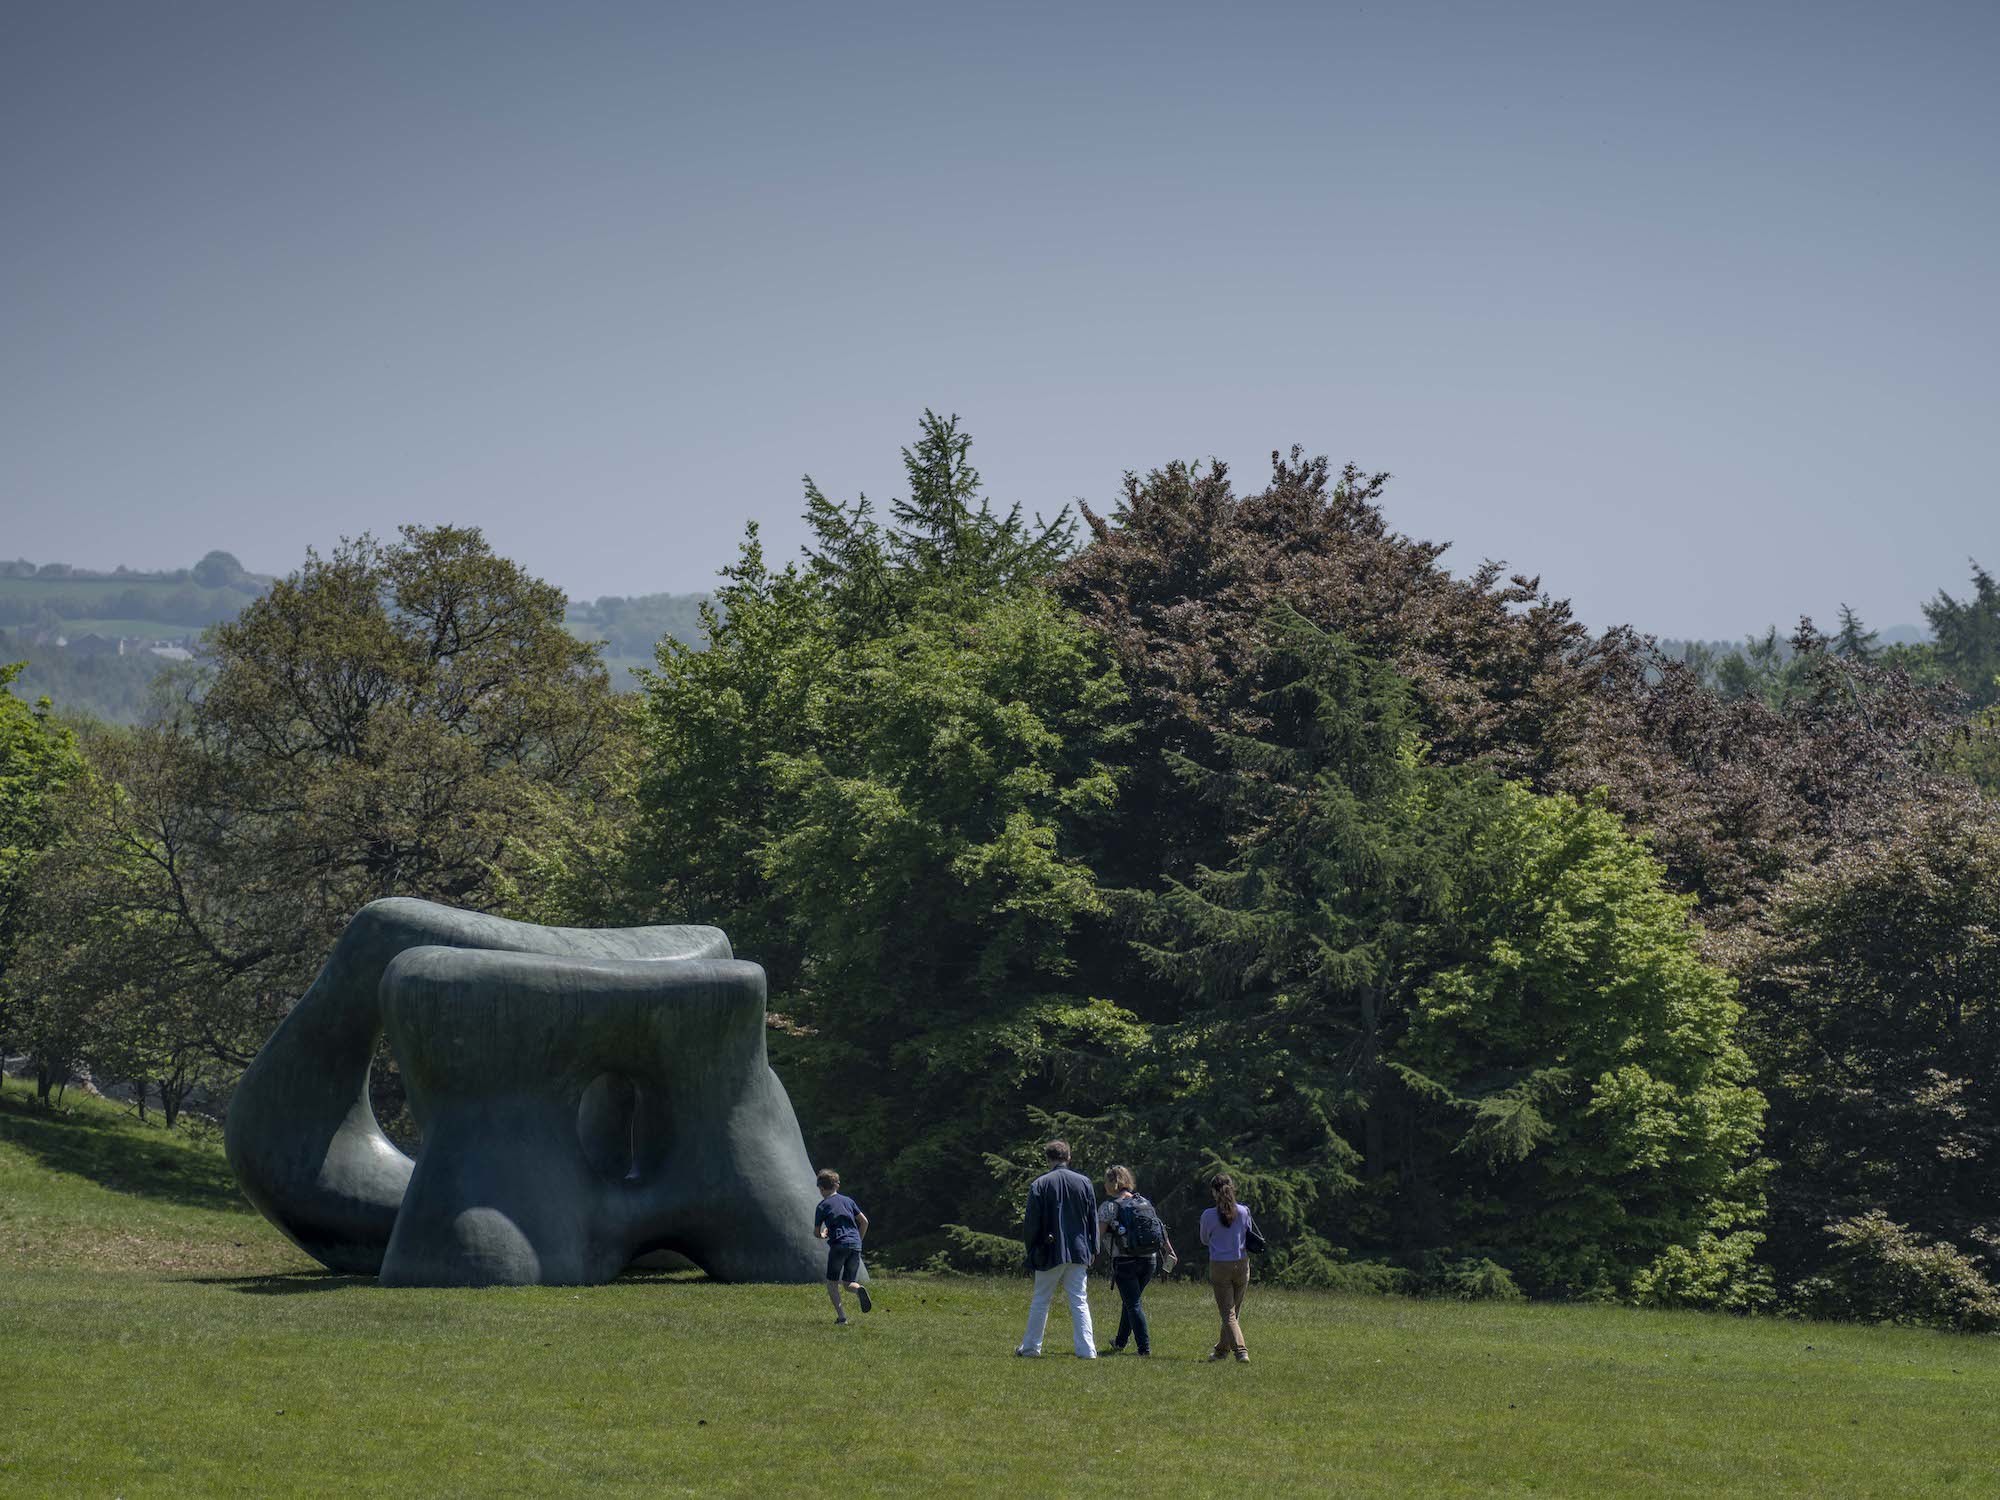 People walk across the grass in the country park towards a Henry Moore sculpture.